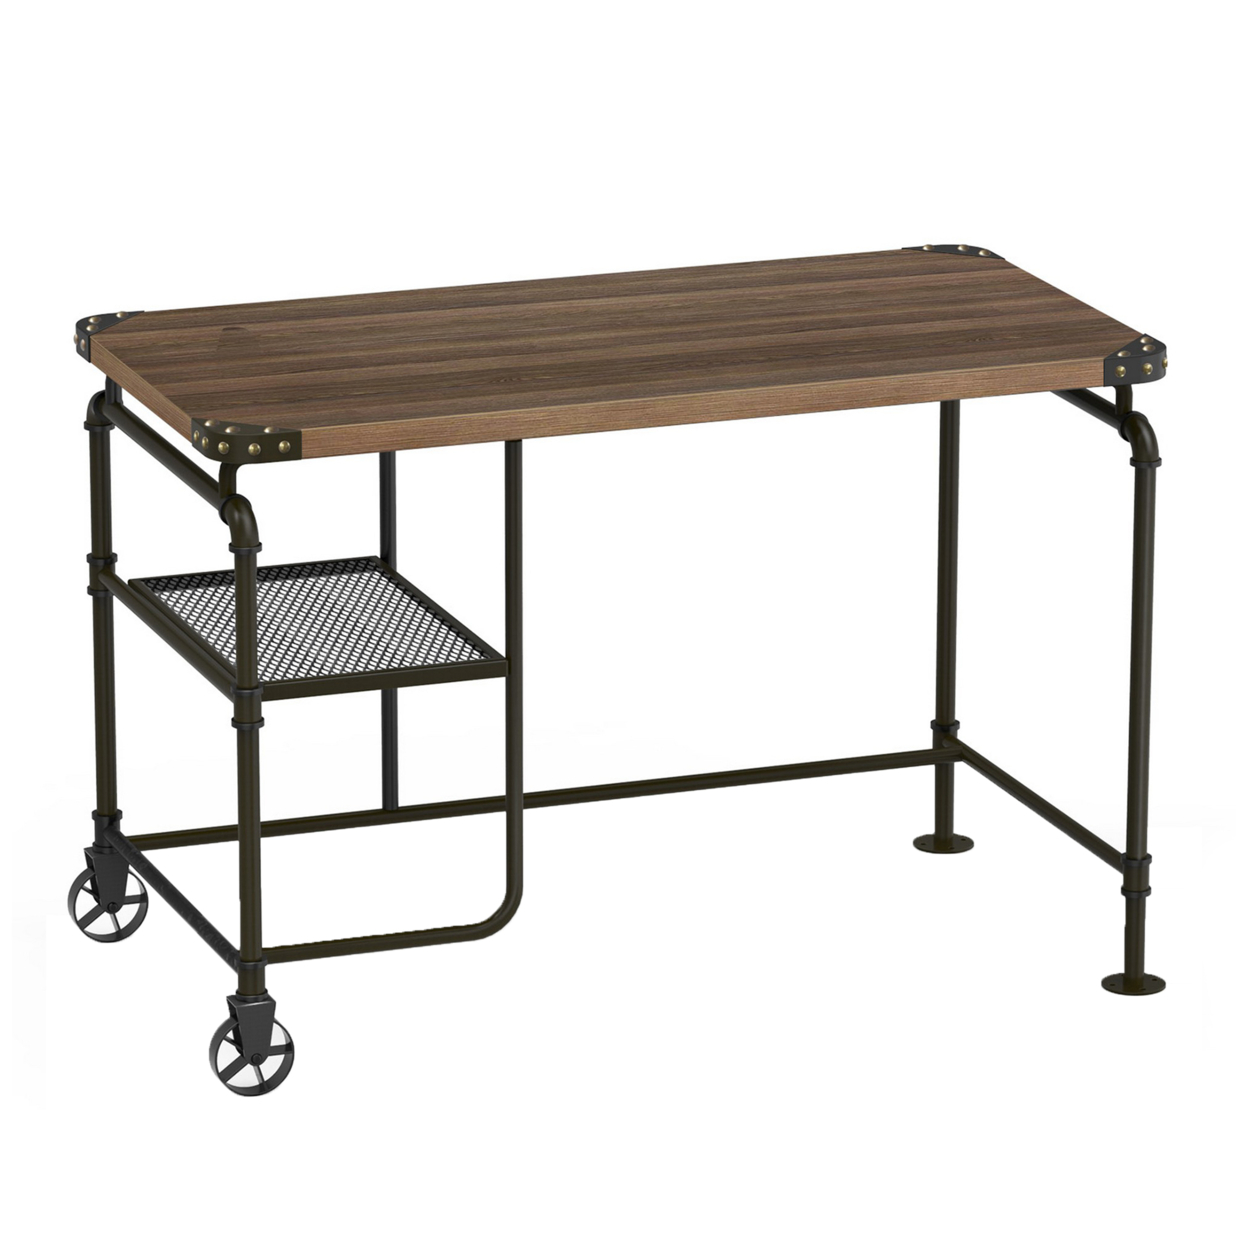 Industrial Metal Writing Desk With Wooden Top, Brown And Black- Saltoro Sherpi